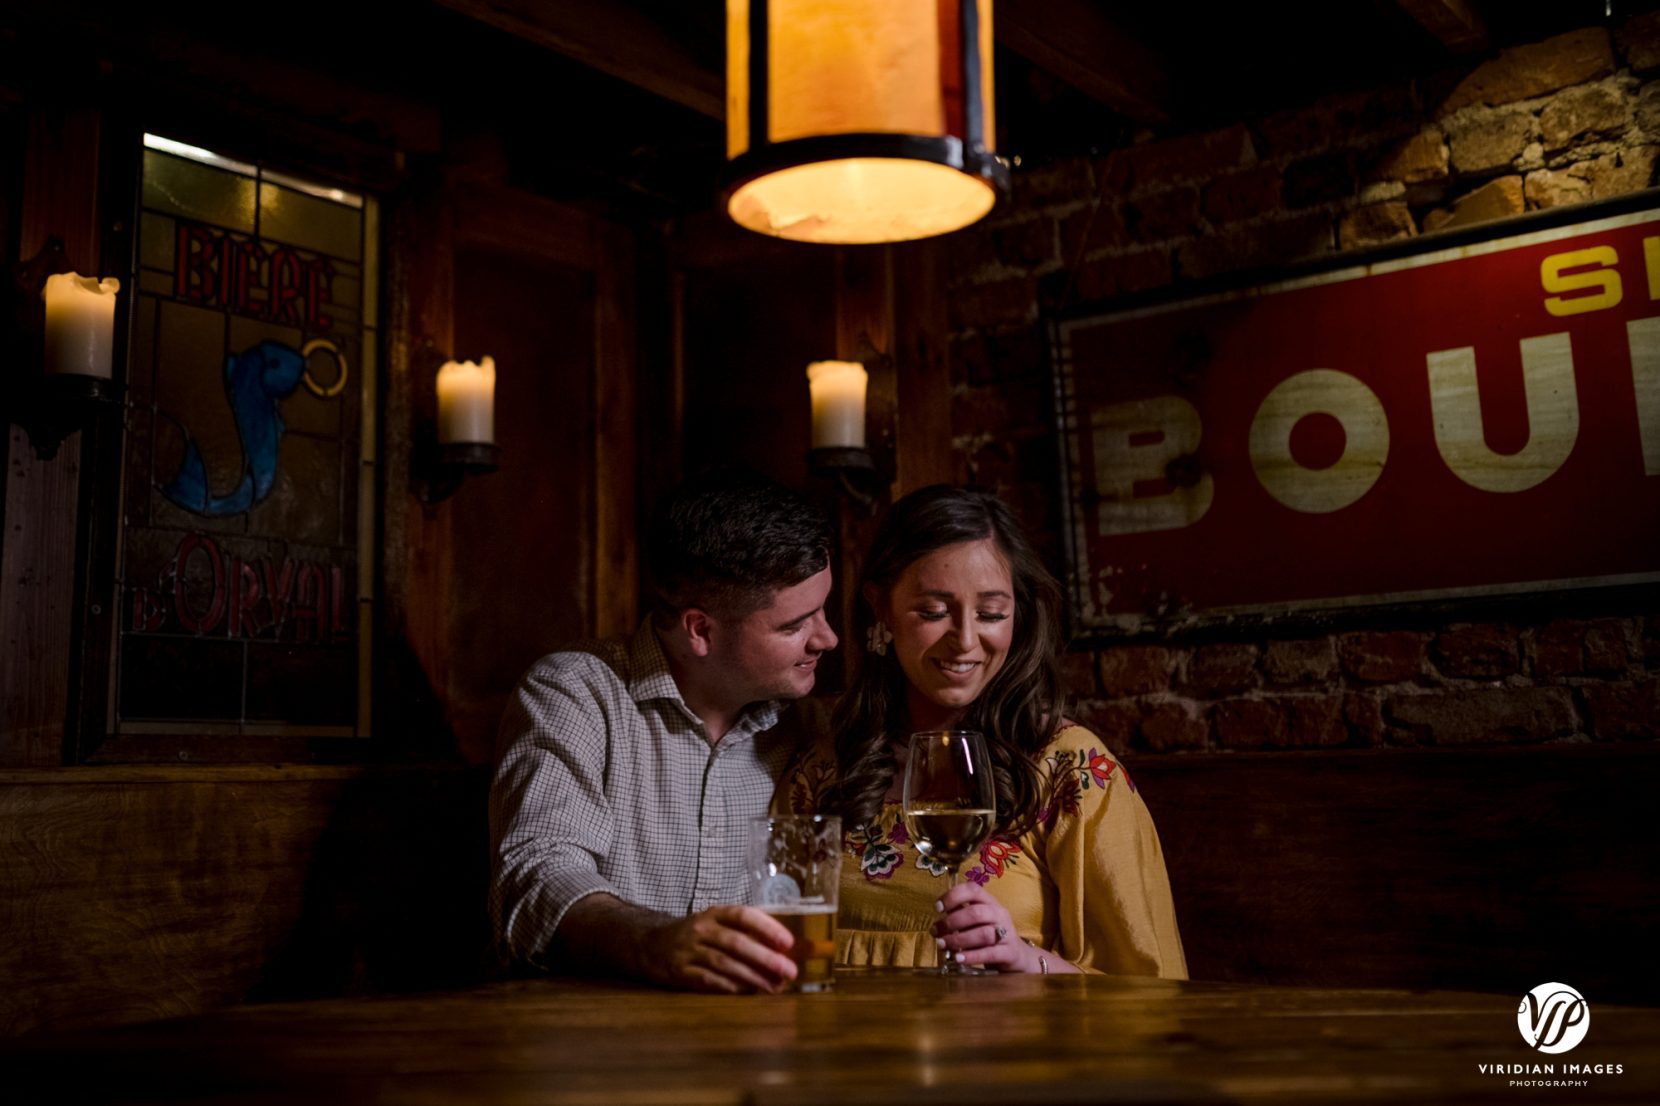 private and romantic moment between couple at bar